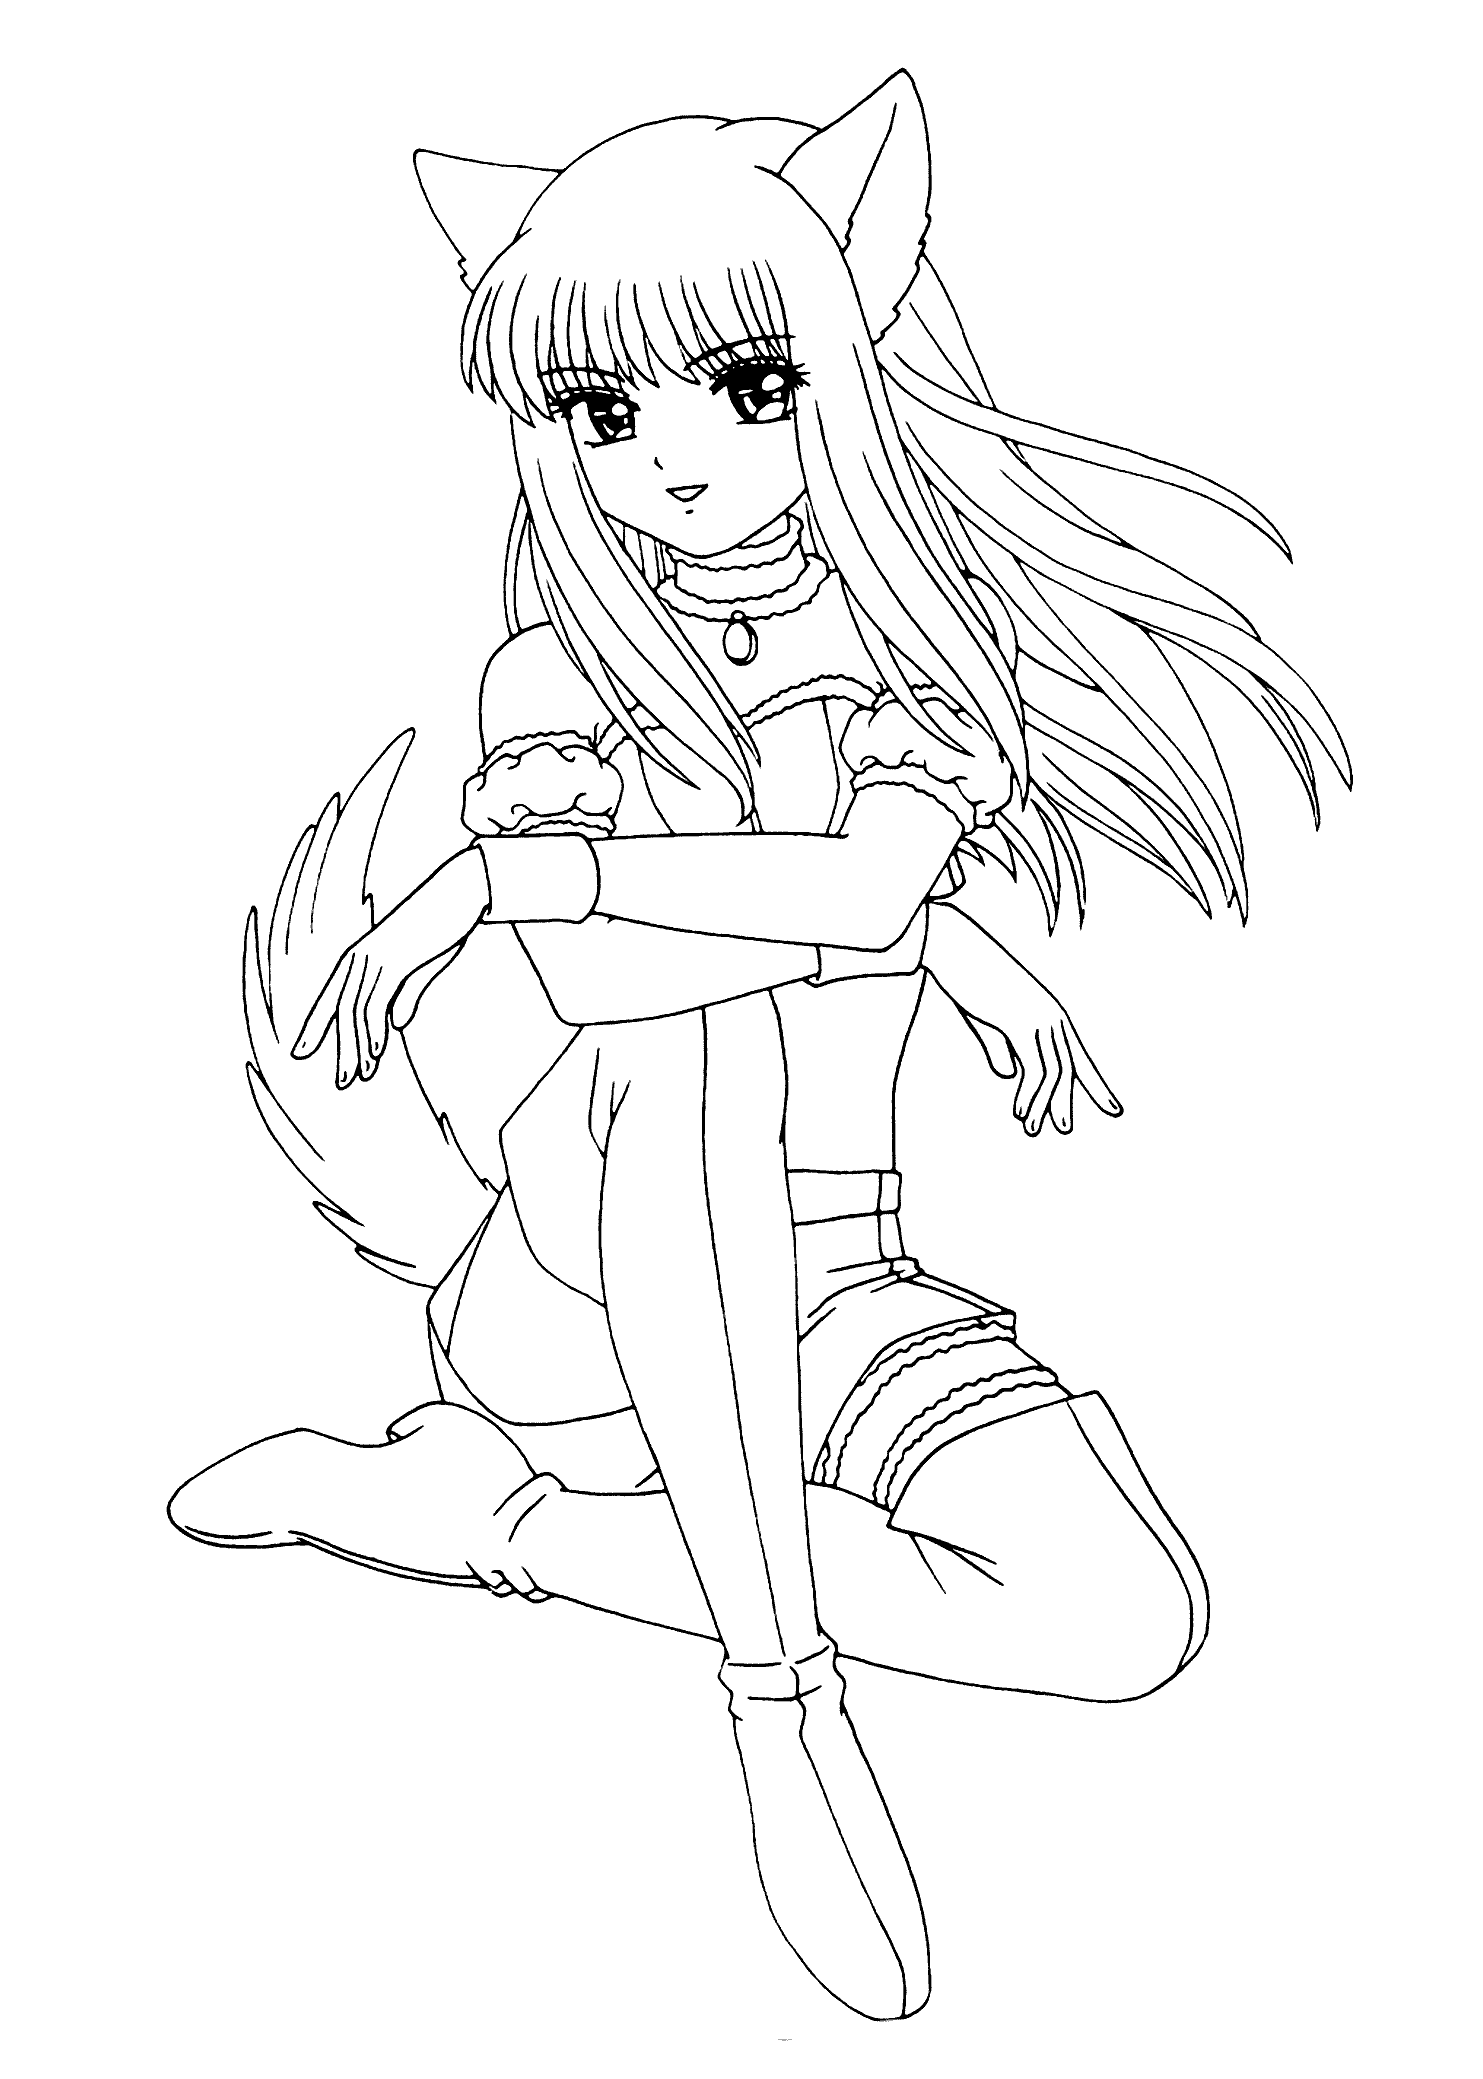 Anime Girls Coloring Page   Coloring Pages For All Ages   Coloring ...